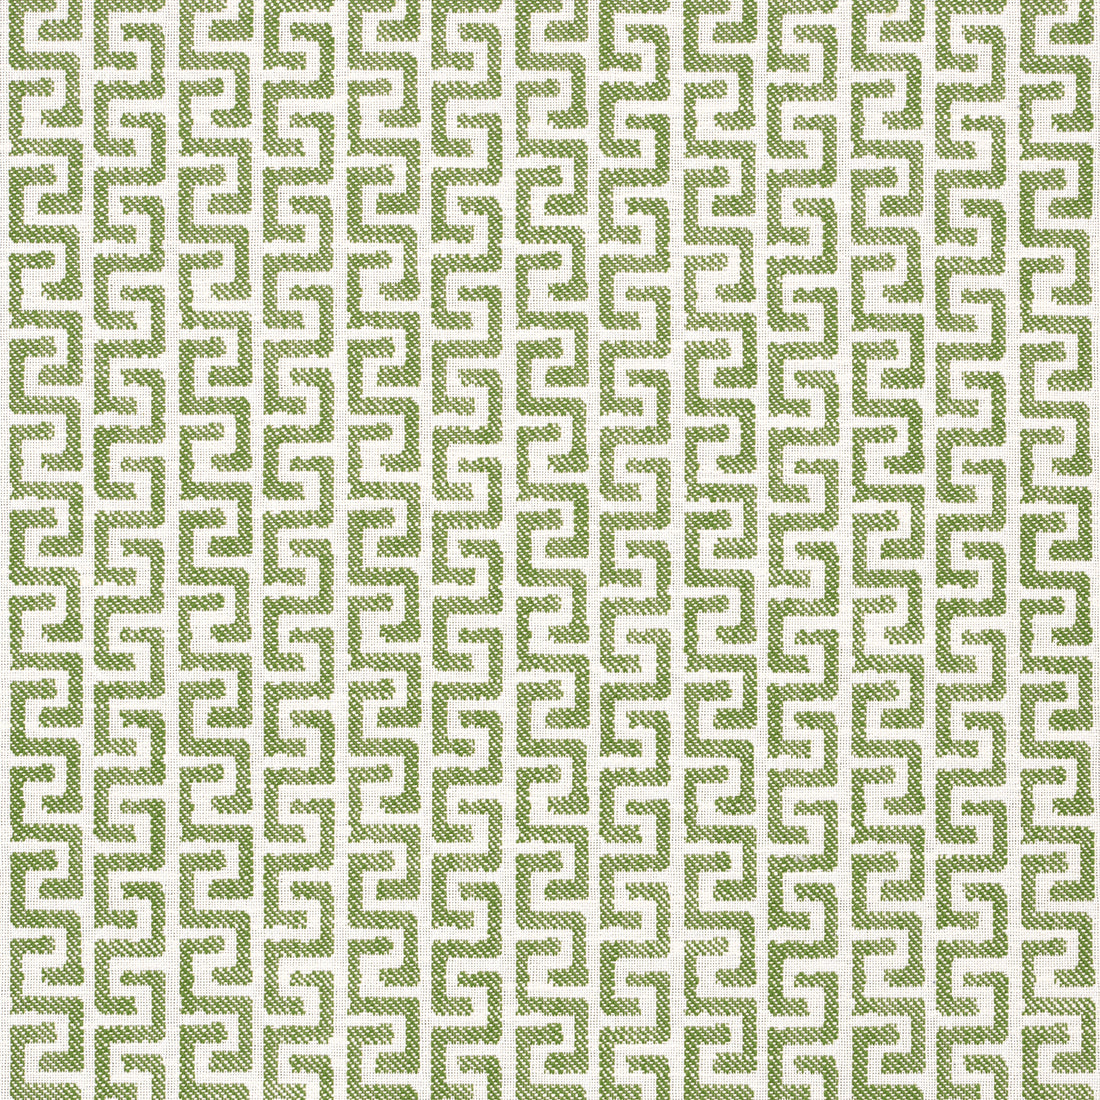 Merritt fabric in olive color - pattern number W74253 - by Thibaut in the Passage collection